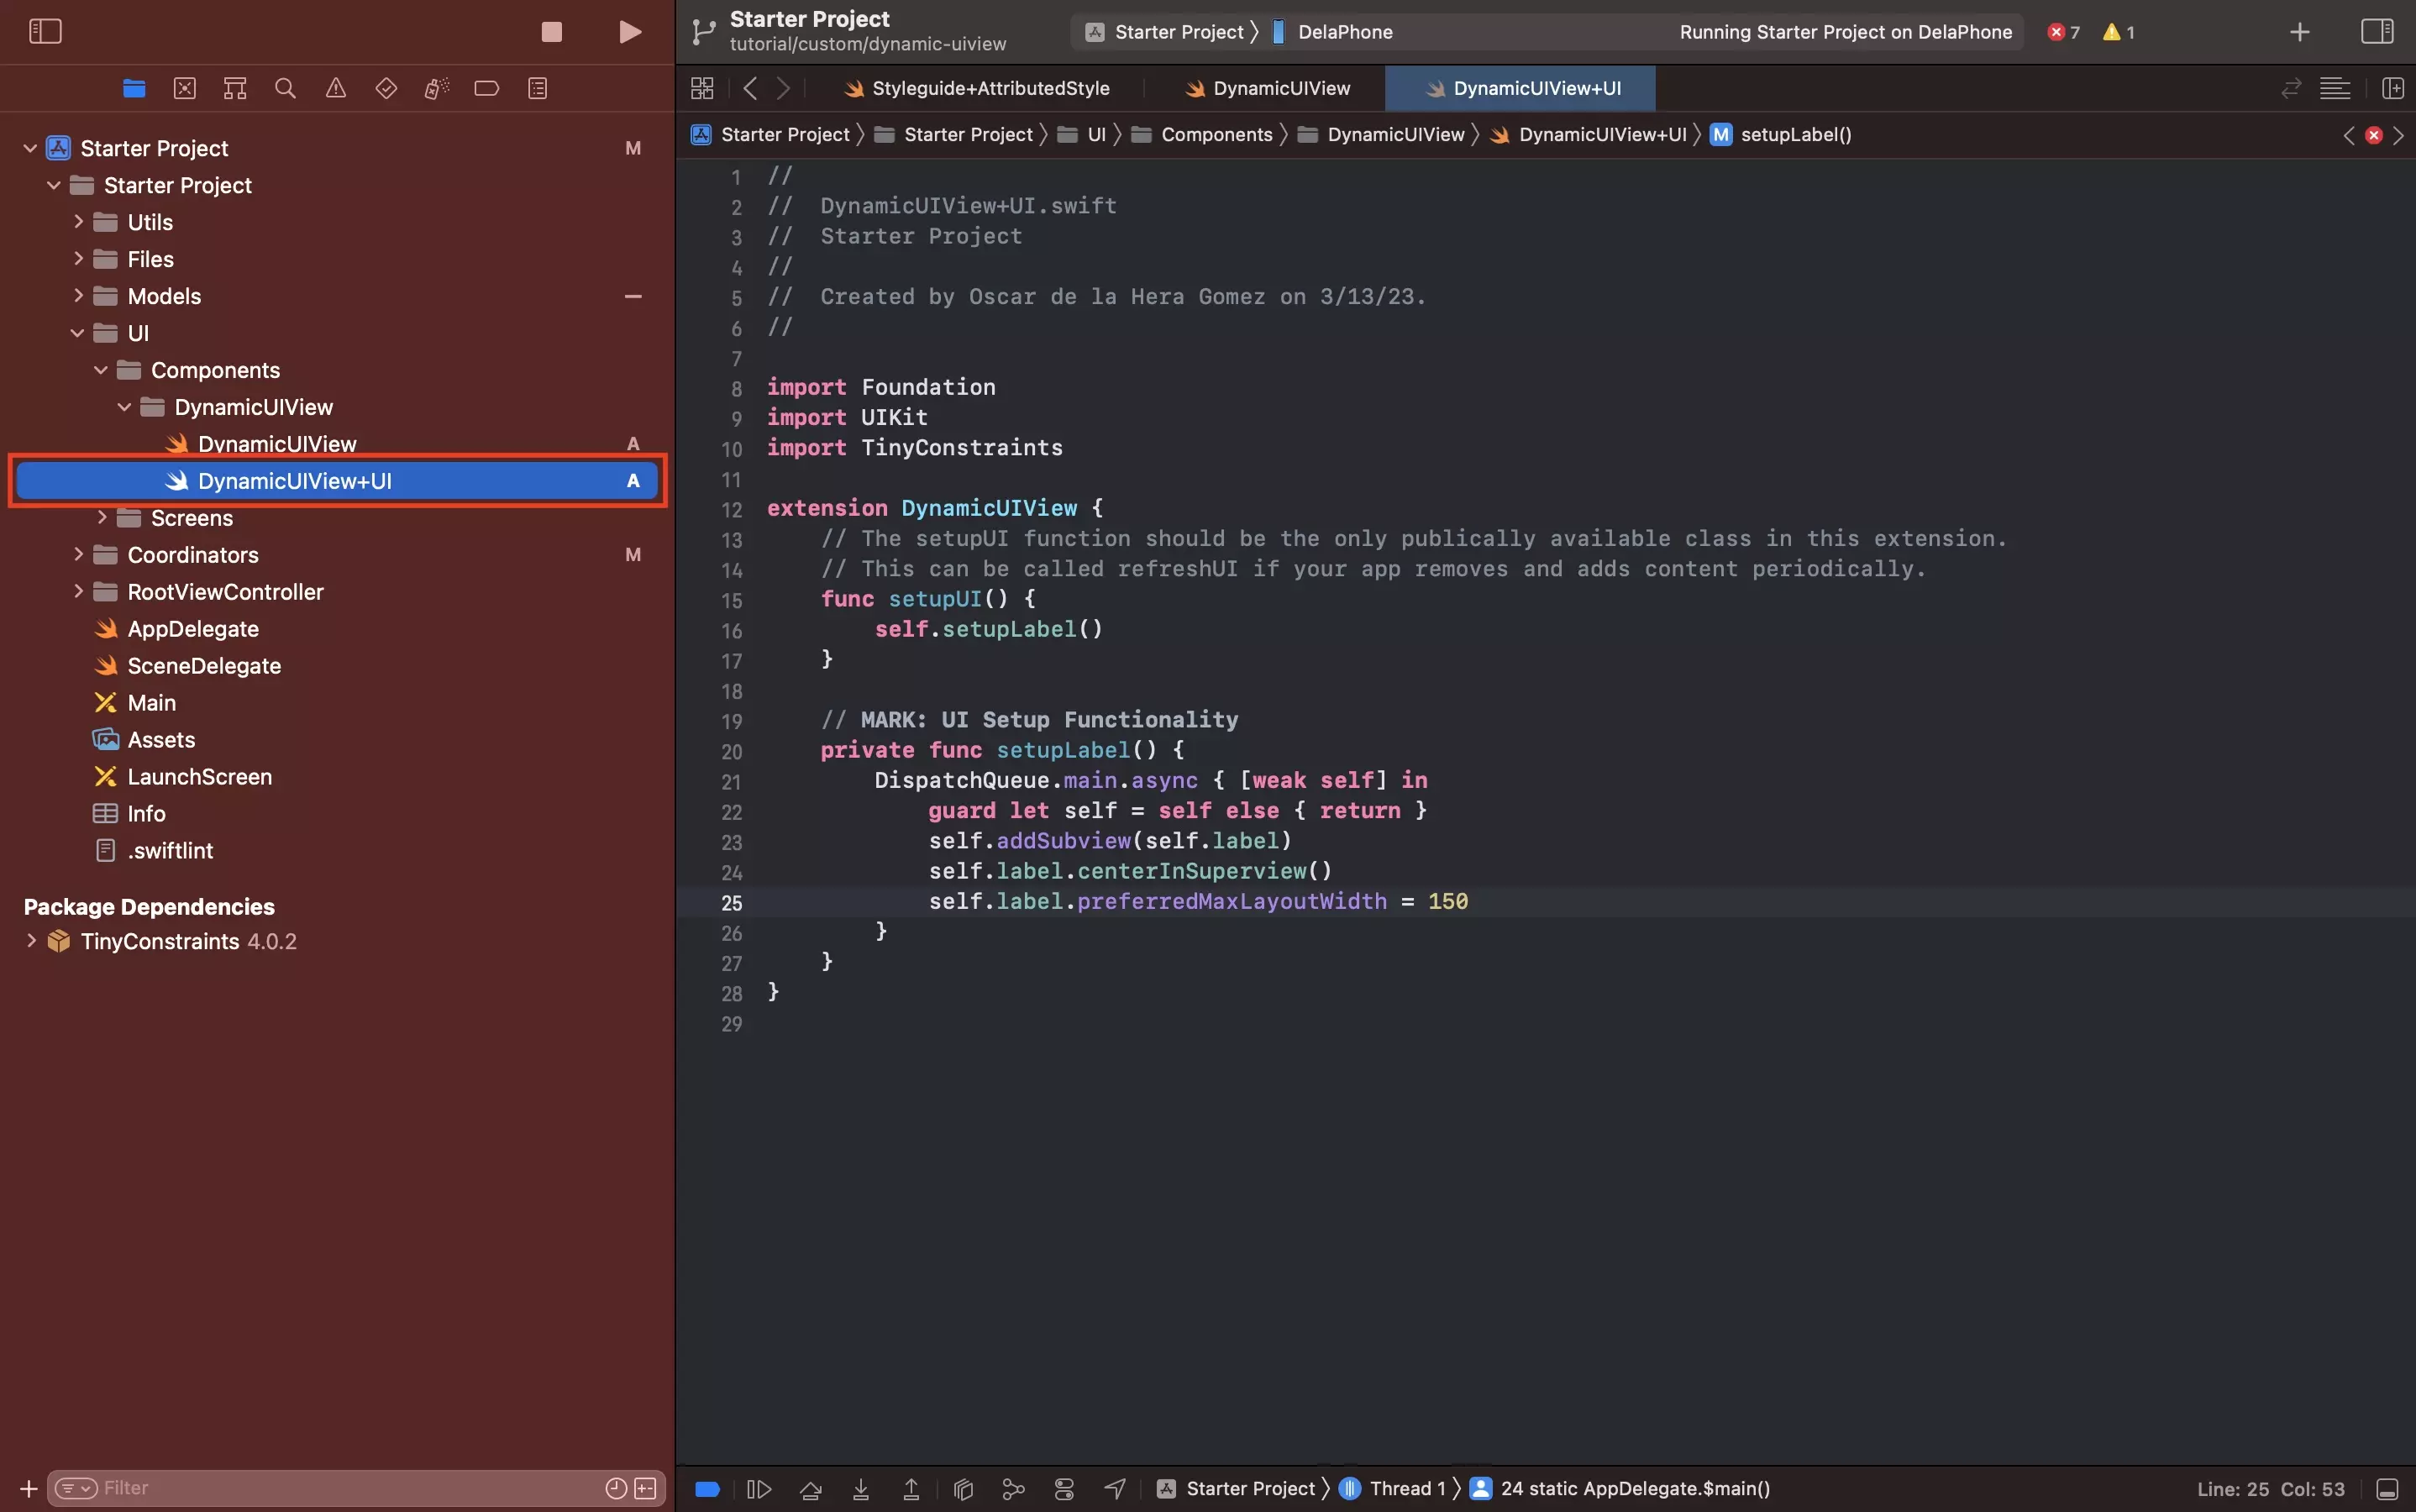 A screenshot of Xcode showing the DynamicUIView+UI.swift file, the code is available below.